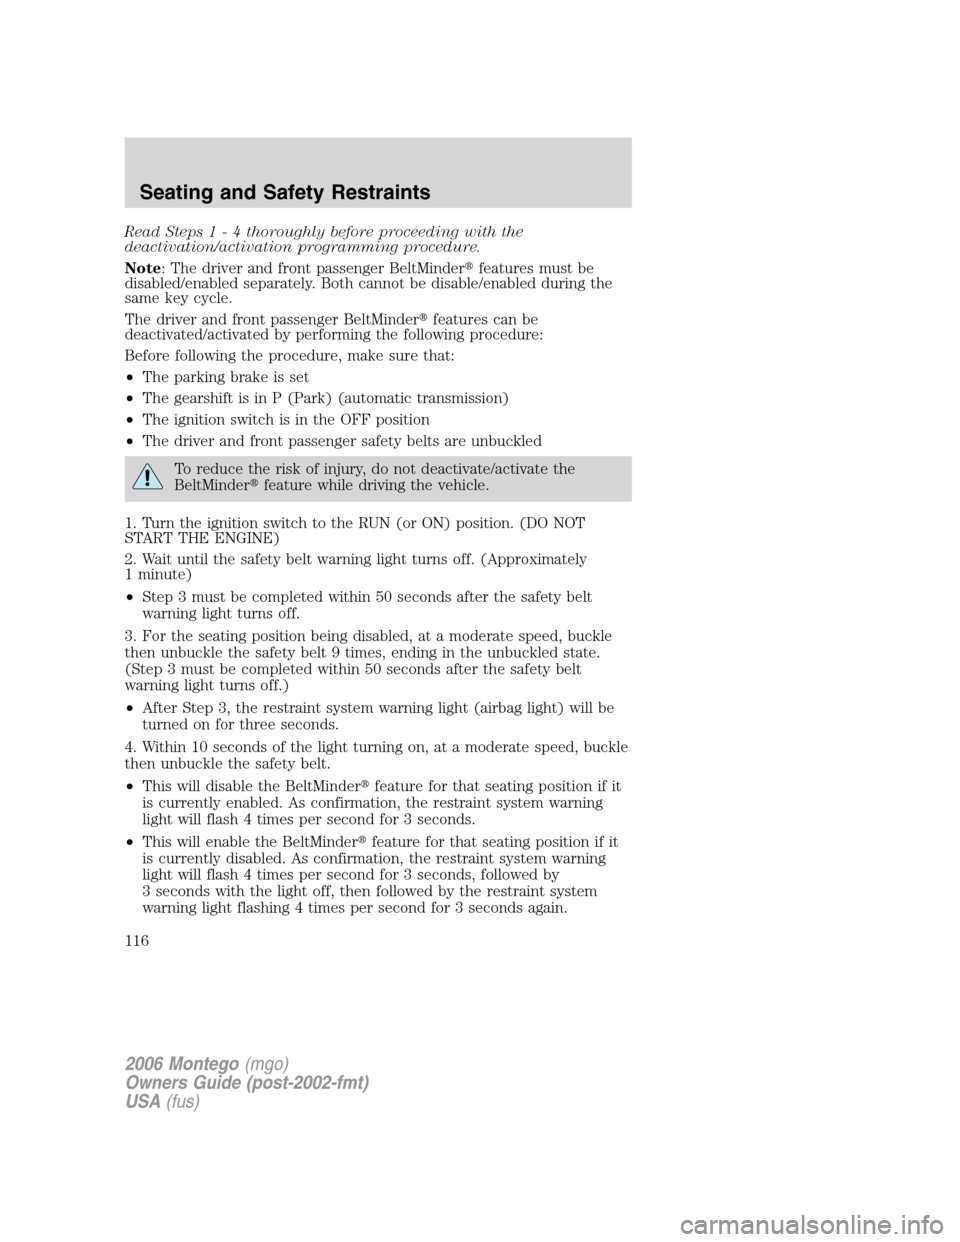 Mercury Montego 2006  Owners Manuals Read Steps1-4thoroughly before proceeding with the
deactivation/activation programming procedure.
Note: The driver and front passenger BeltMinderfeatures must be
disabled/enabled separately. Both can